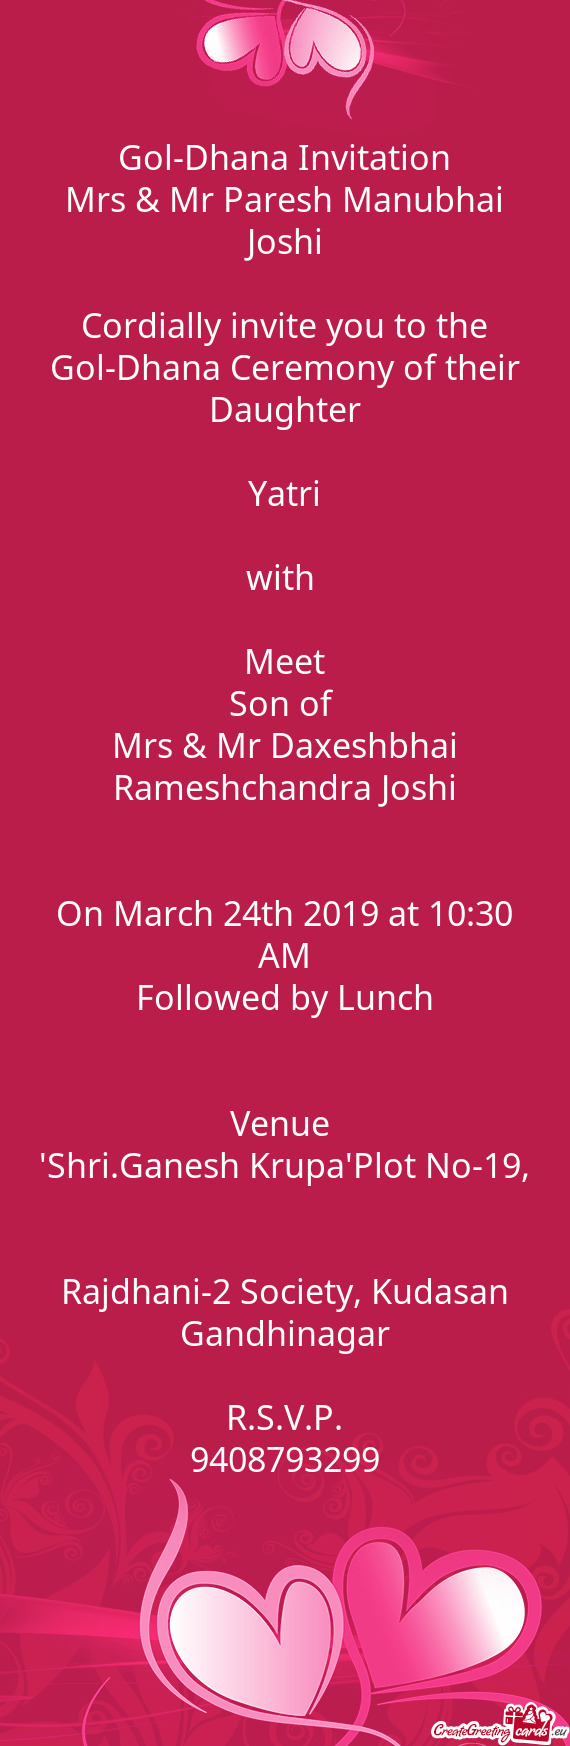 Cordially invite you to the Gol-Dhana Ceremony of their Daughter